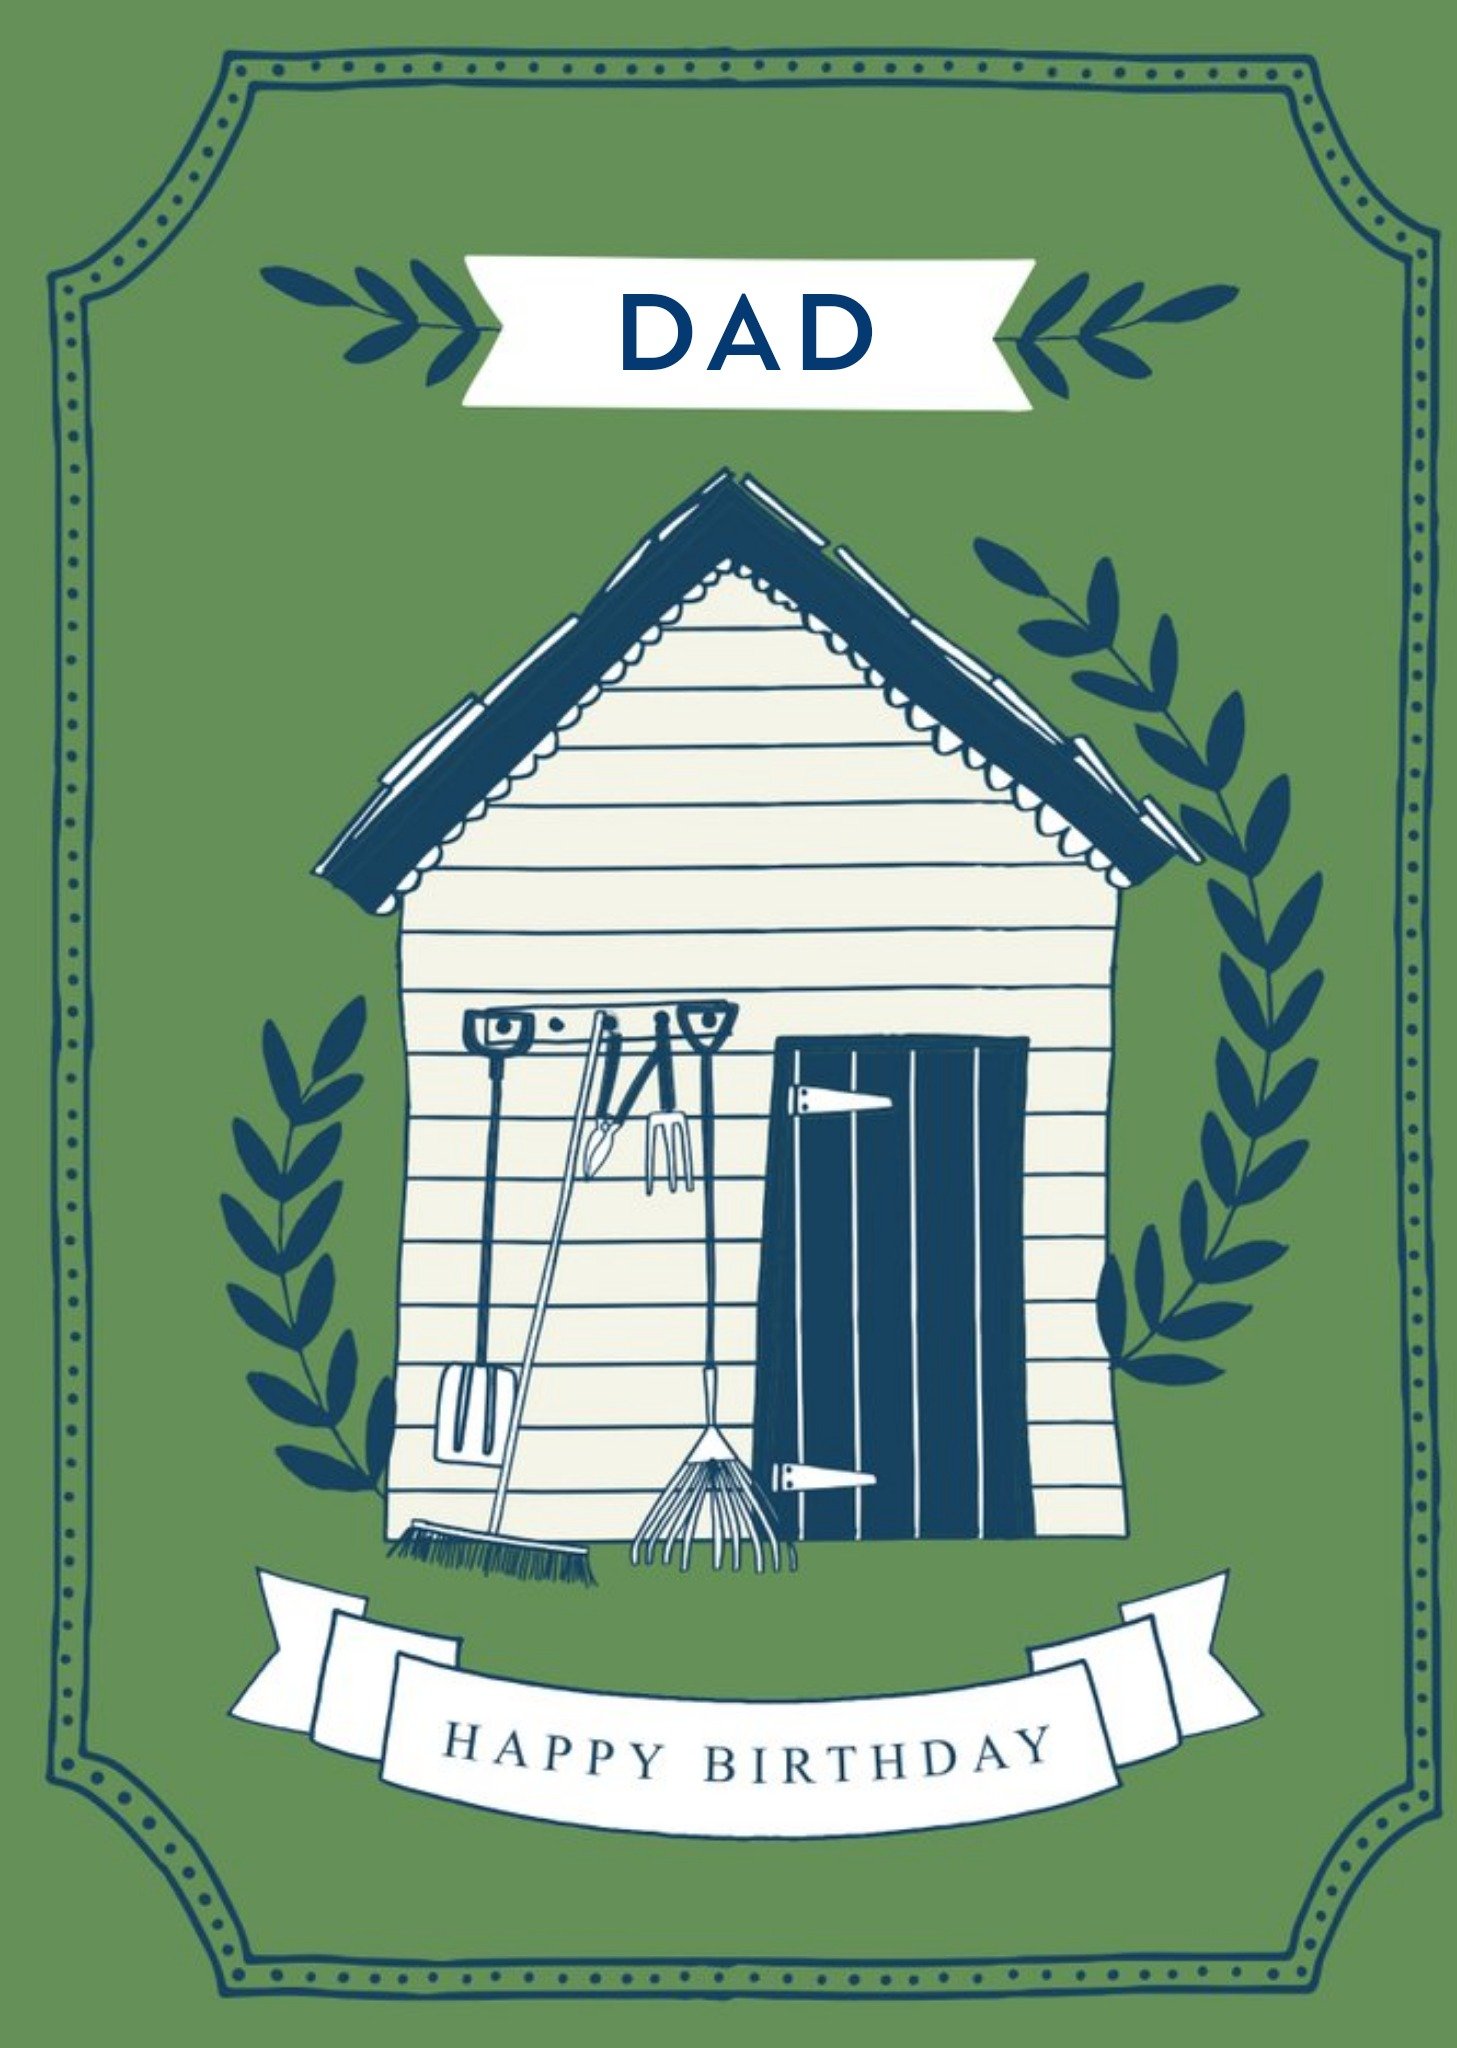 Moonpig Birthday Card - Garden Shed - Dad, Large